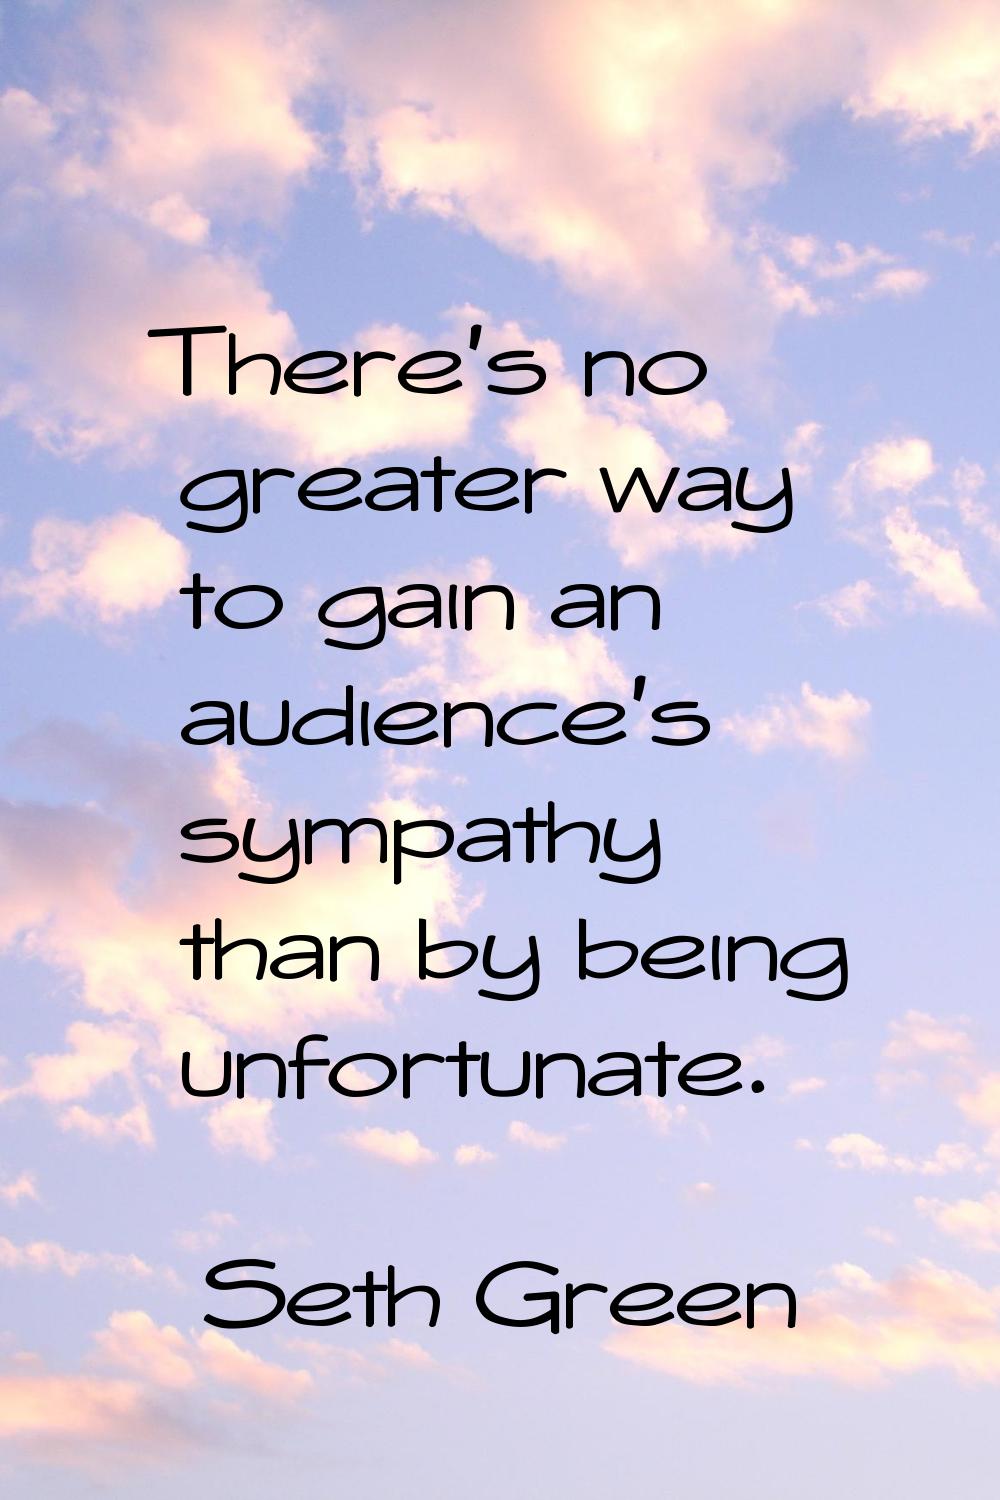 There's no greater way to gain an audience's sympathy than by being unfortunate.